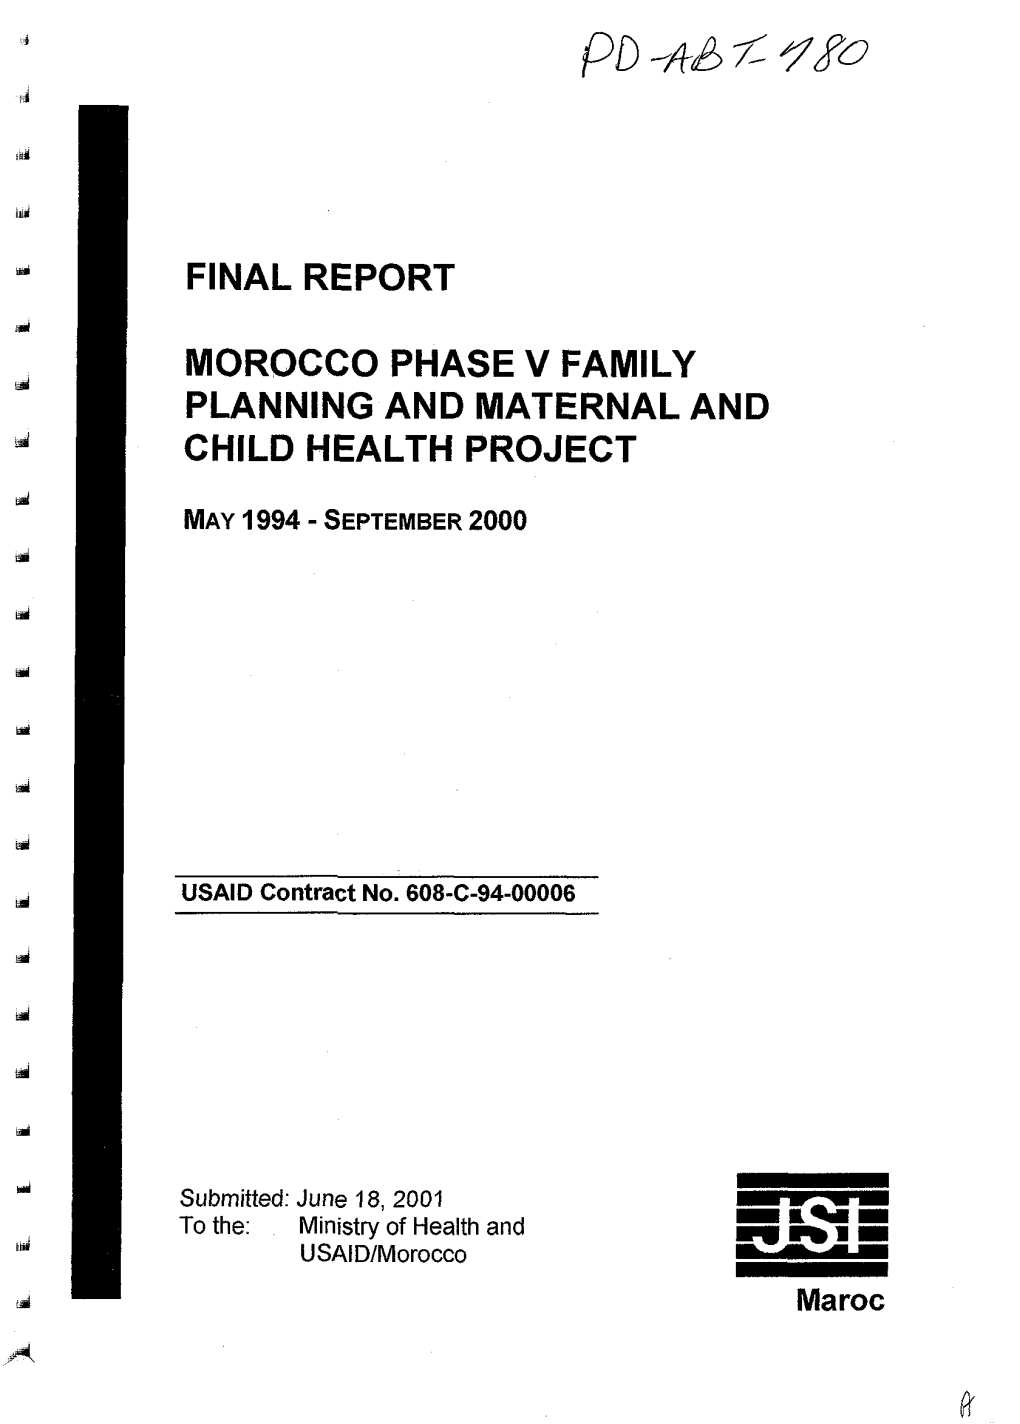 Final Report Morocco Phase V Family Planning and Maternal and Child